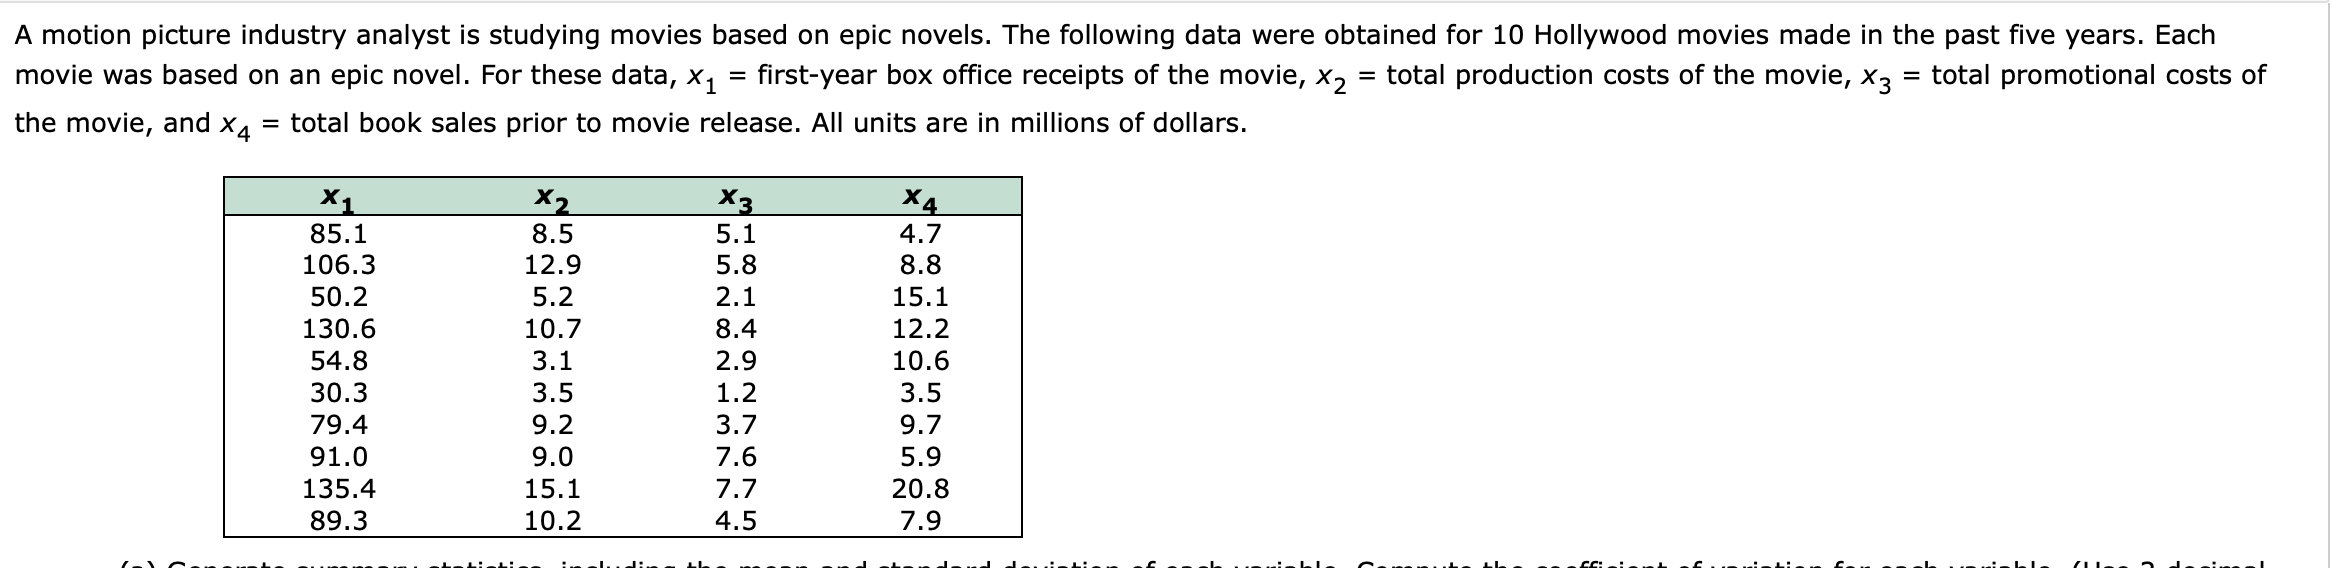 A motion picture industry analyst is studying movies based on epic novels. The following data were obtained for 10 Hollywood movies made in the past five years. Each
movie was based on an epic novel. For these data, x, = first-year box office receipts of the movie, x, = total production costs of the movie, x = total promotional costs of
the movie, and X4 = total book sales prior to movie release. All units are in millions of dollars.
85.1
Xз
X4
8.5
12.9
5.2
10.7
3.1
3.5
9.2
9.0
15.1
10.2
5.1
5.8
2.1
8.4
2.9
1.2
3.7
4.7
8.8
106.3
15.1
130.6
54.8
30.3
79.4
12.2
10.6
3.5
9.7
5.9
20.8
91.0
7.6
135.4
7.7
89.3
4.5
7.9
